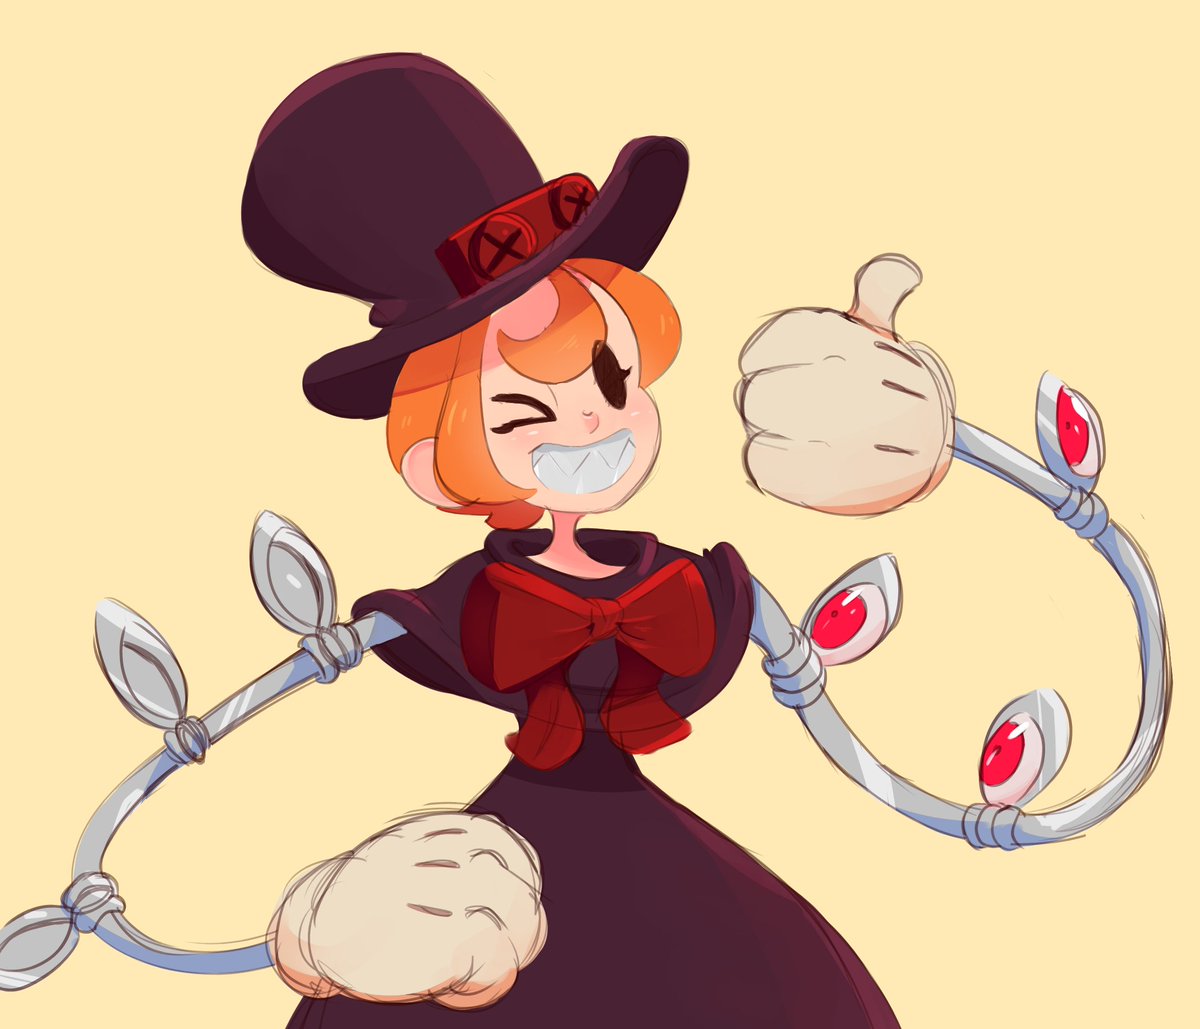 RT @Zorrobii: Peacock! :D shes my second favorite to play as lol #skullgirls https://t.co/isuqNUVtx4